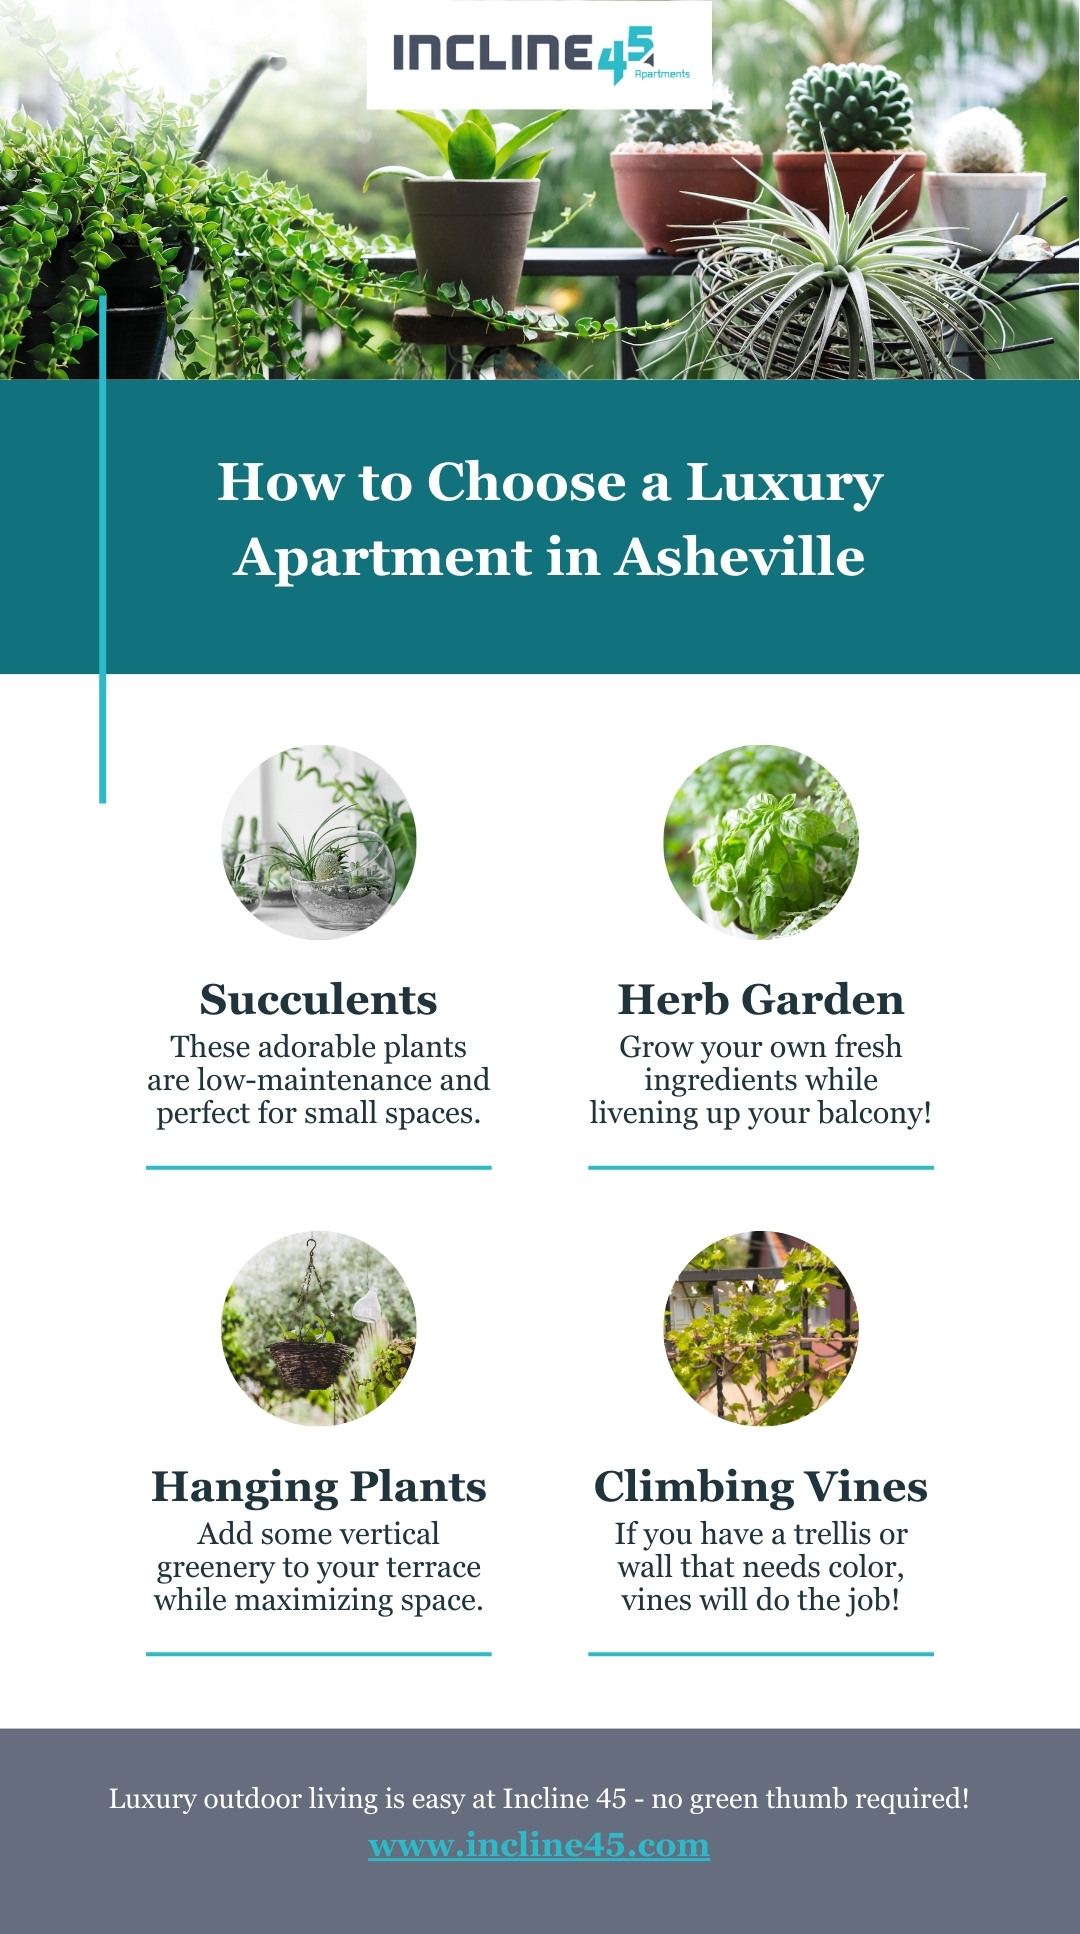 infographic - 4 Plants That Are Perfect for Your Apartment's Outdoor Space.jpg